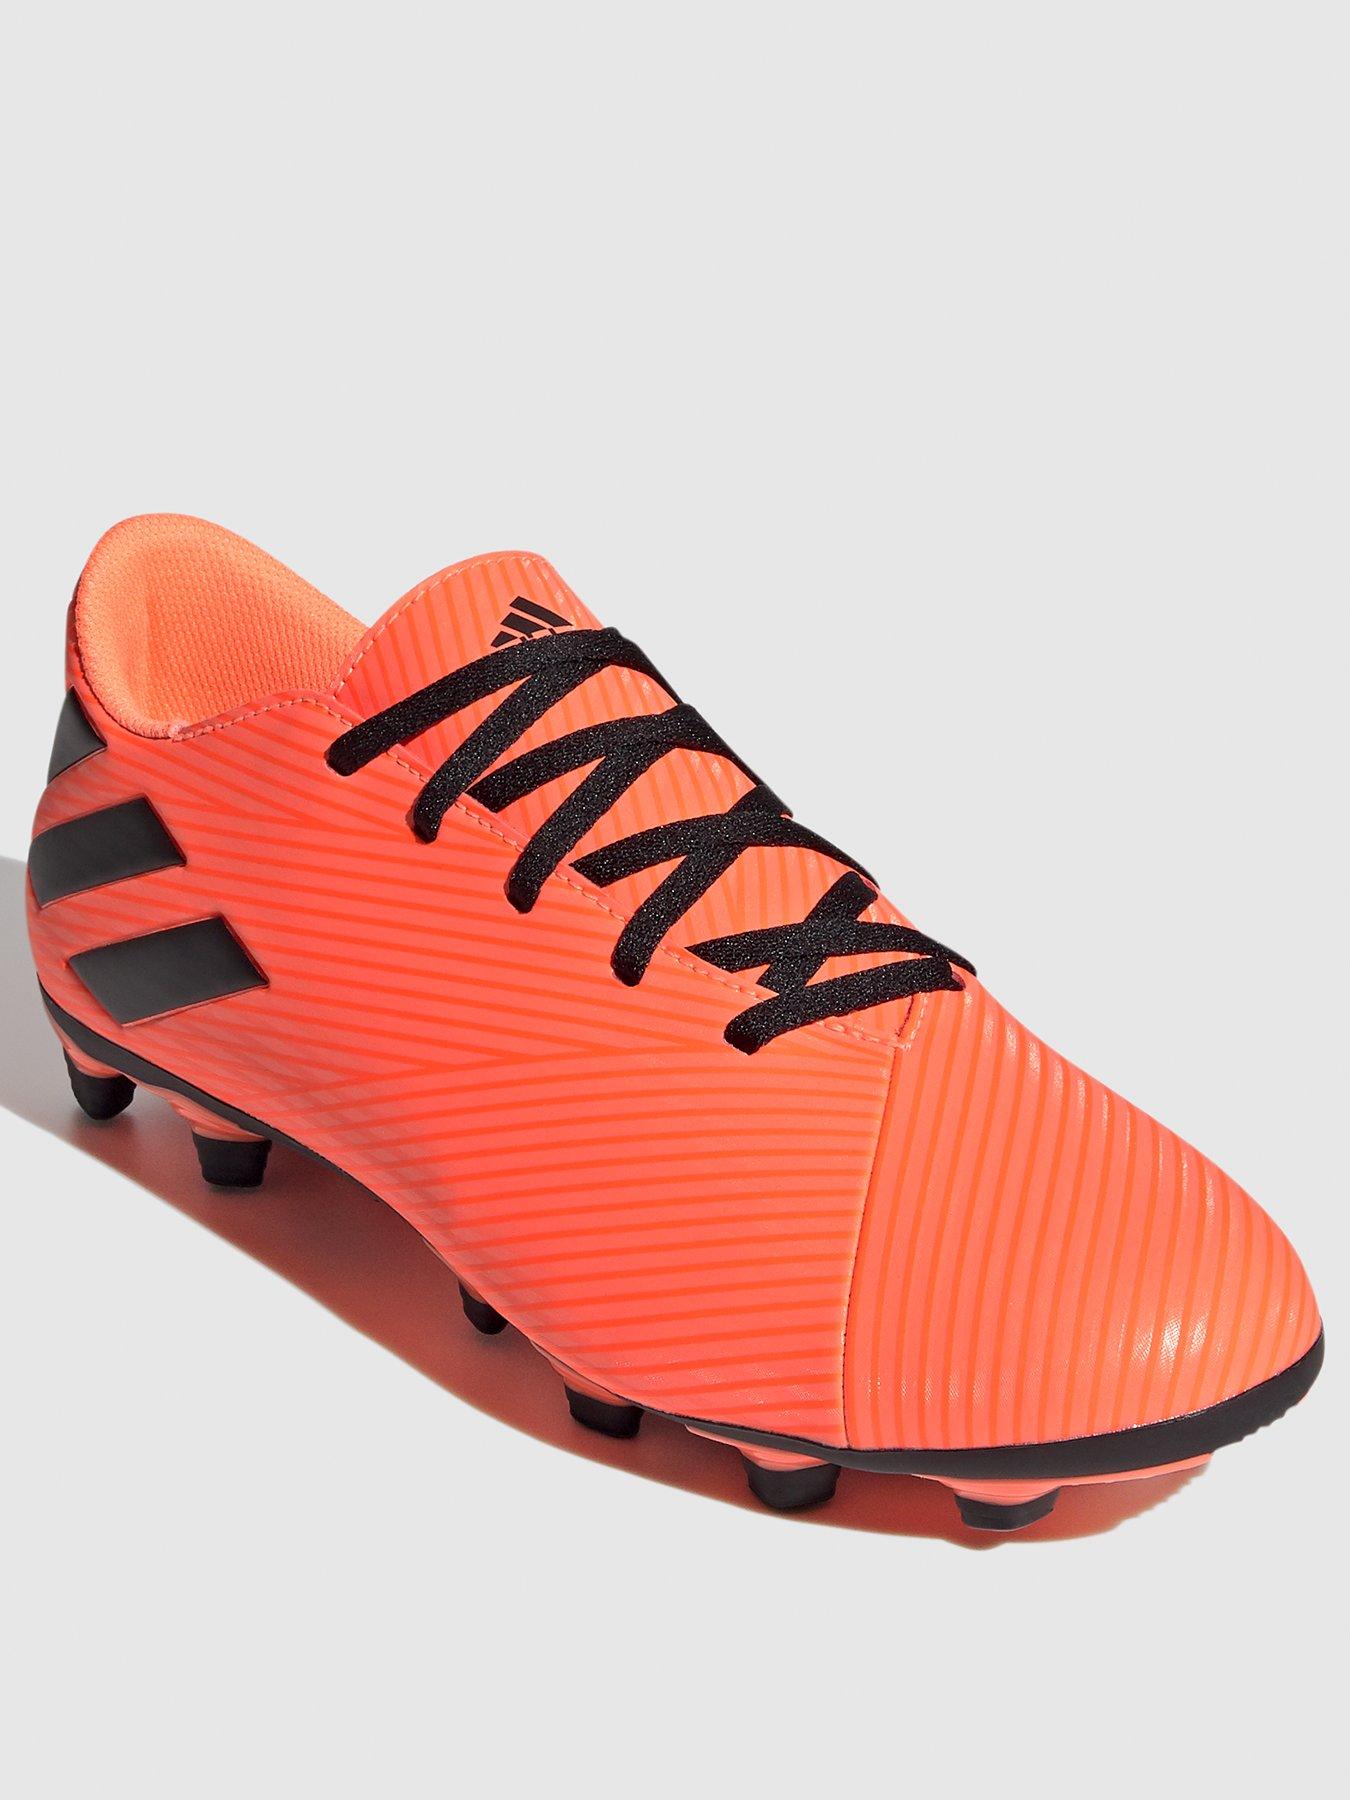 adidas football boots red